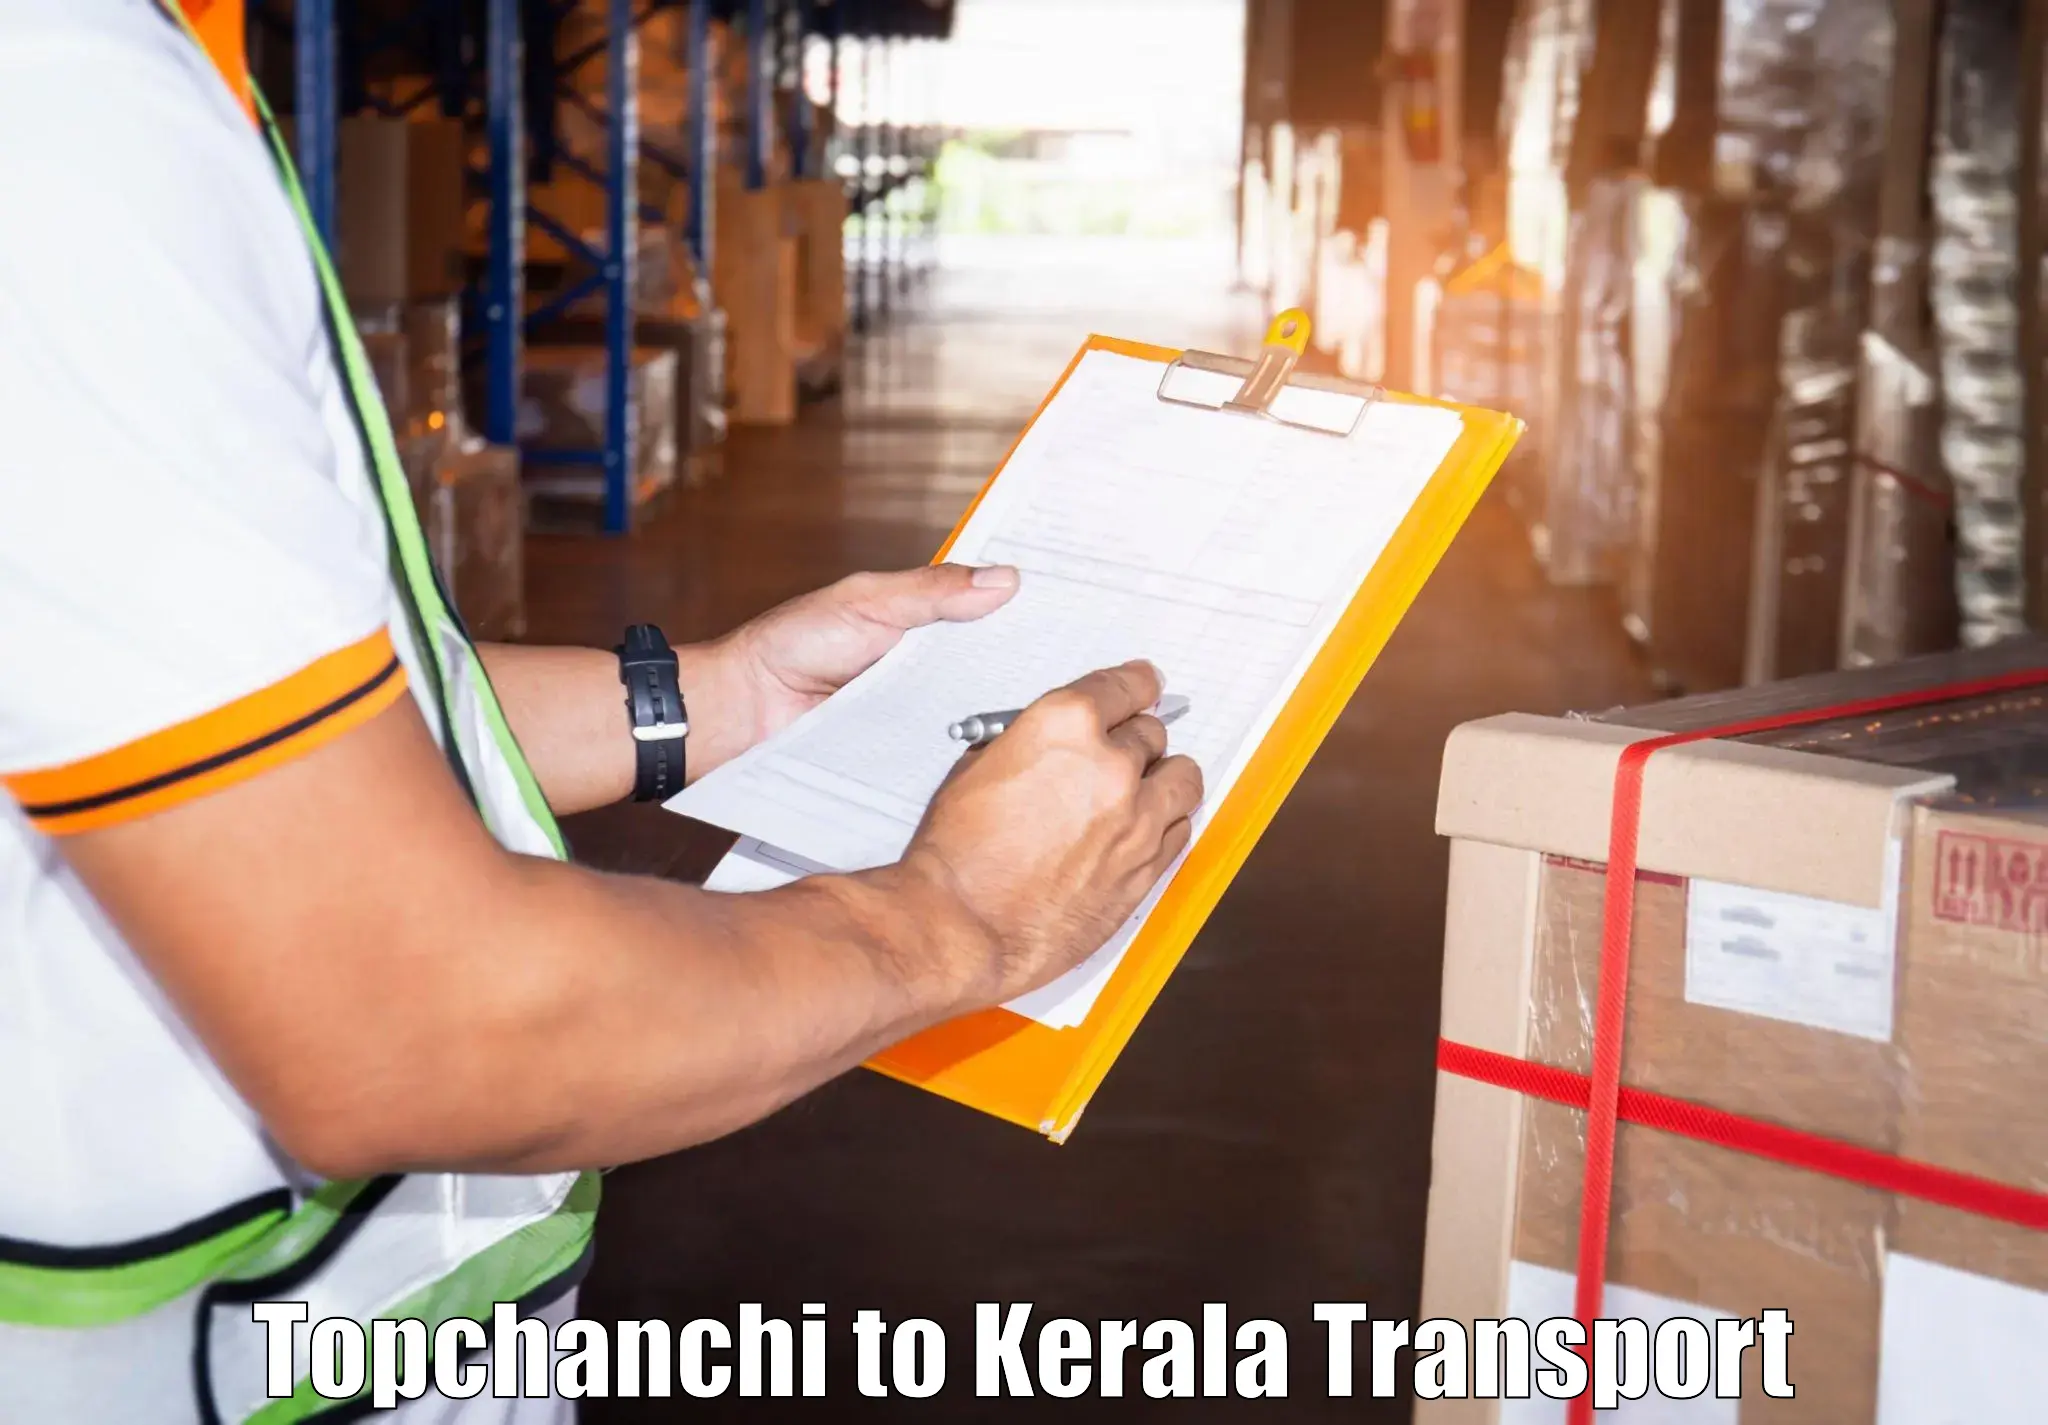 Delivery service Topchanchi to Kozhikode